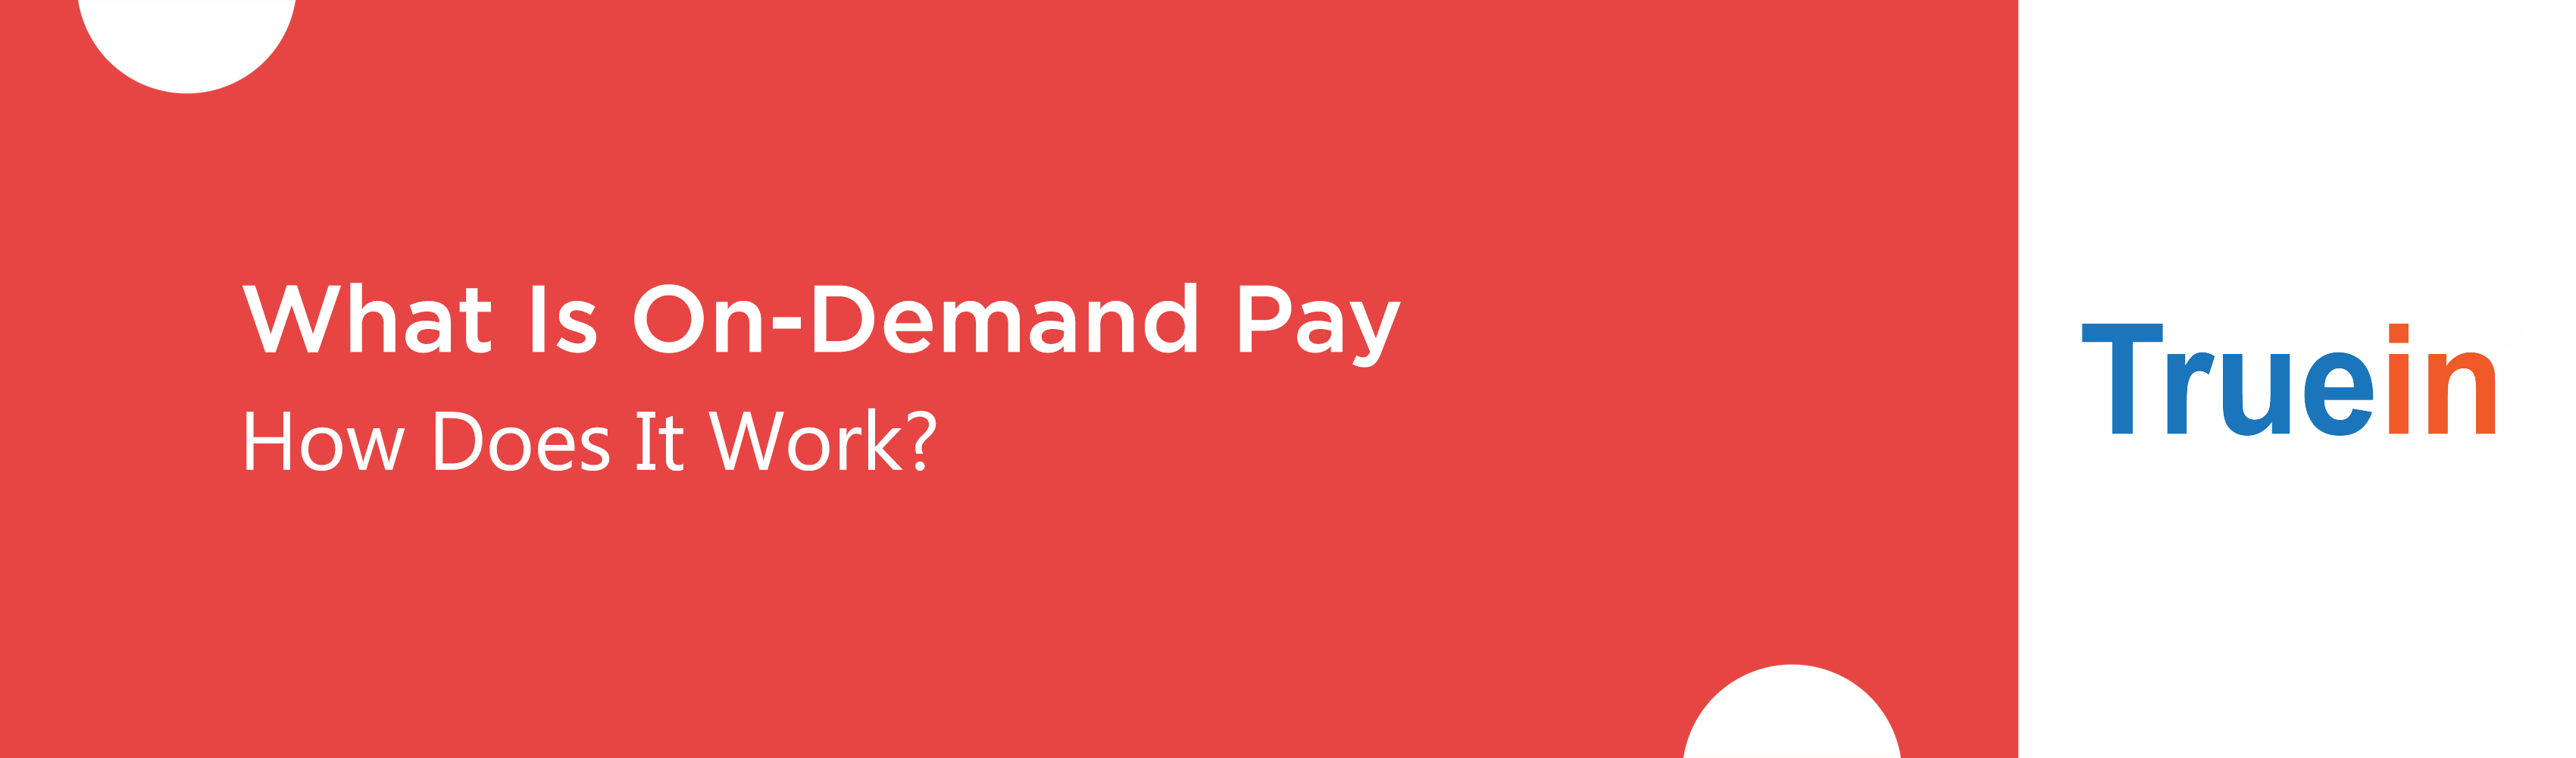 What Is On-Demand Pay and How Does It Work?